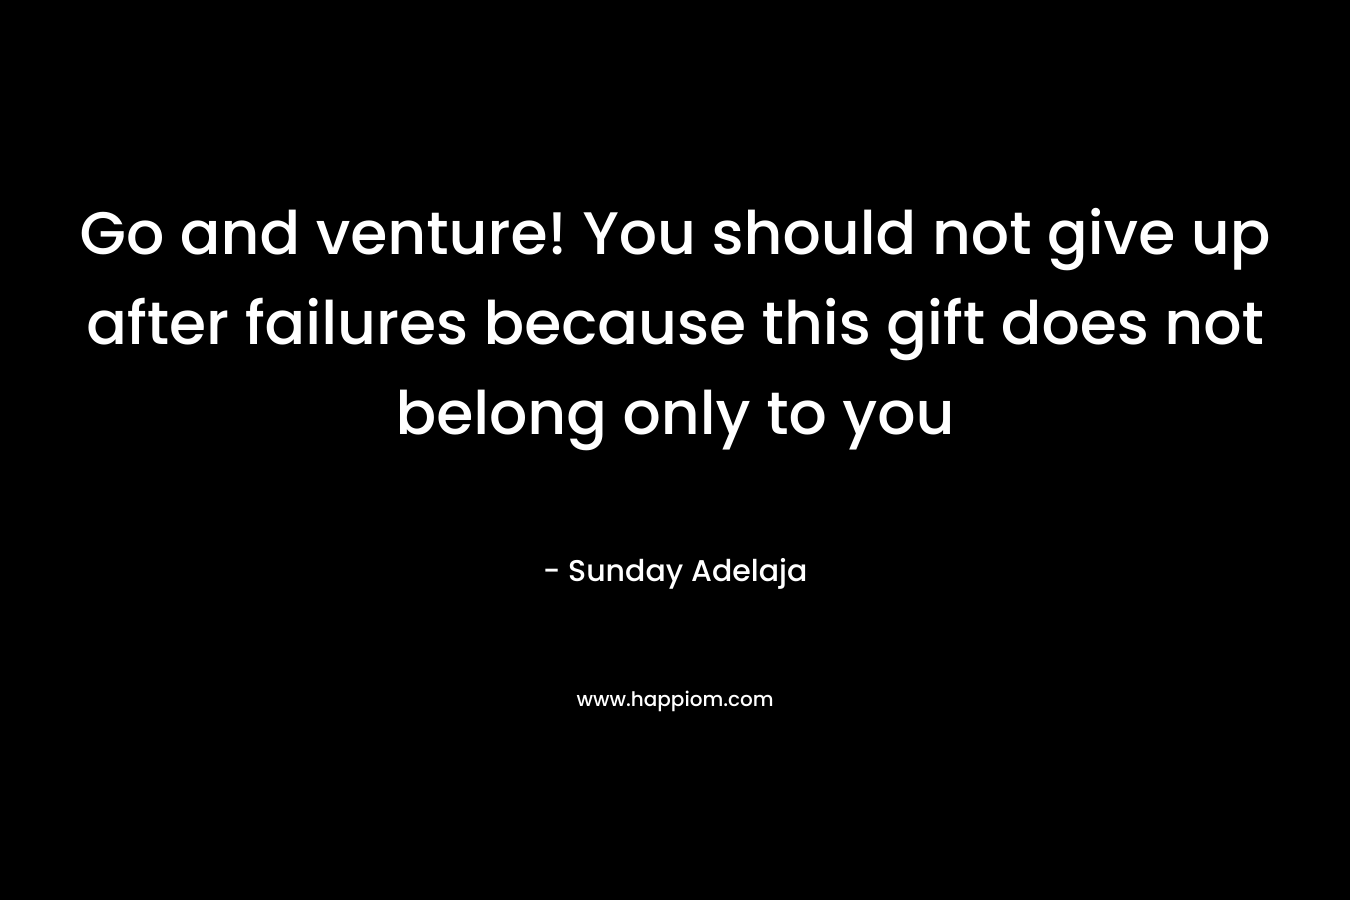 Go and venture! You should not give up after failures because this gift does not belong only to you